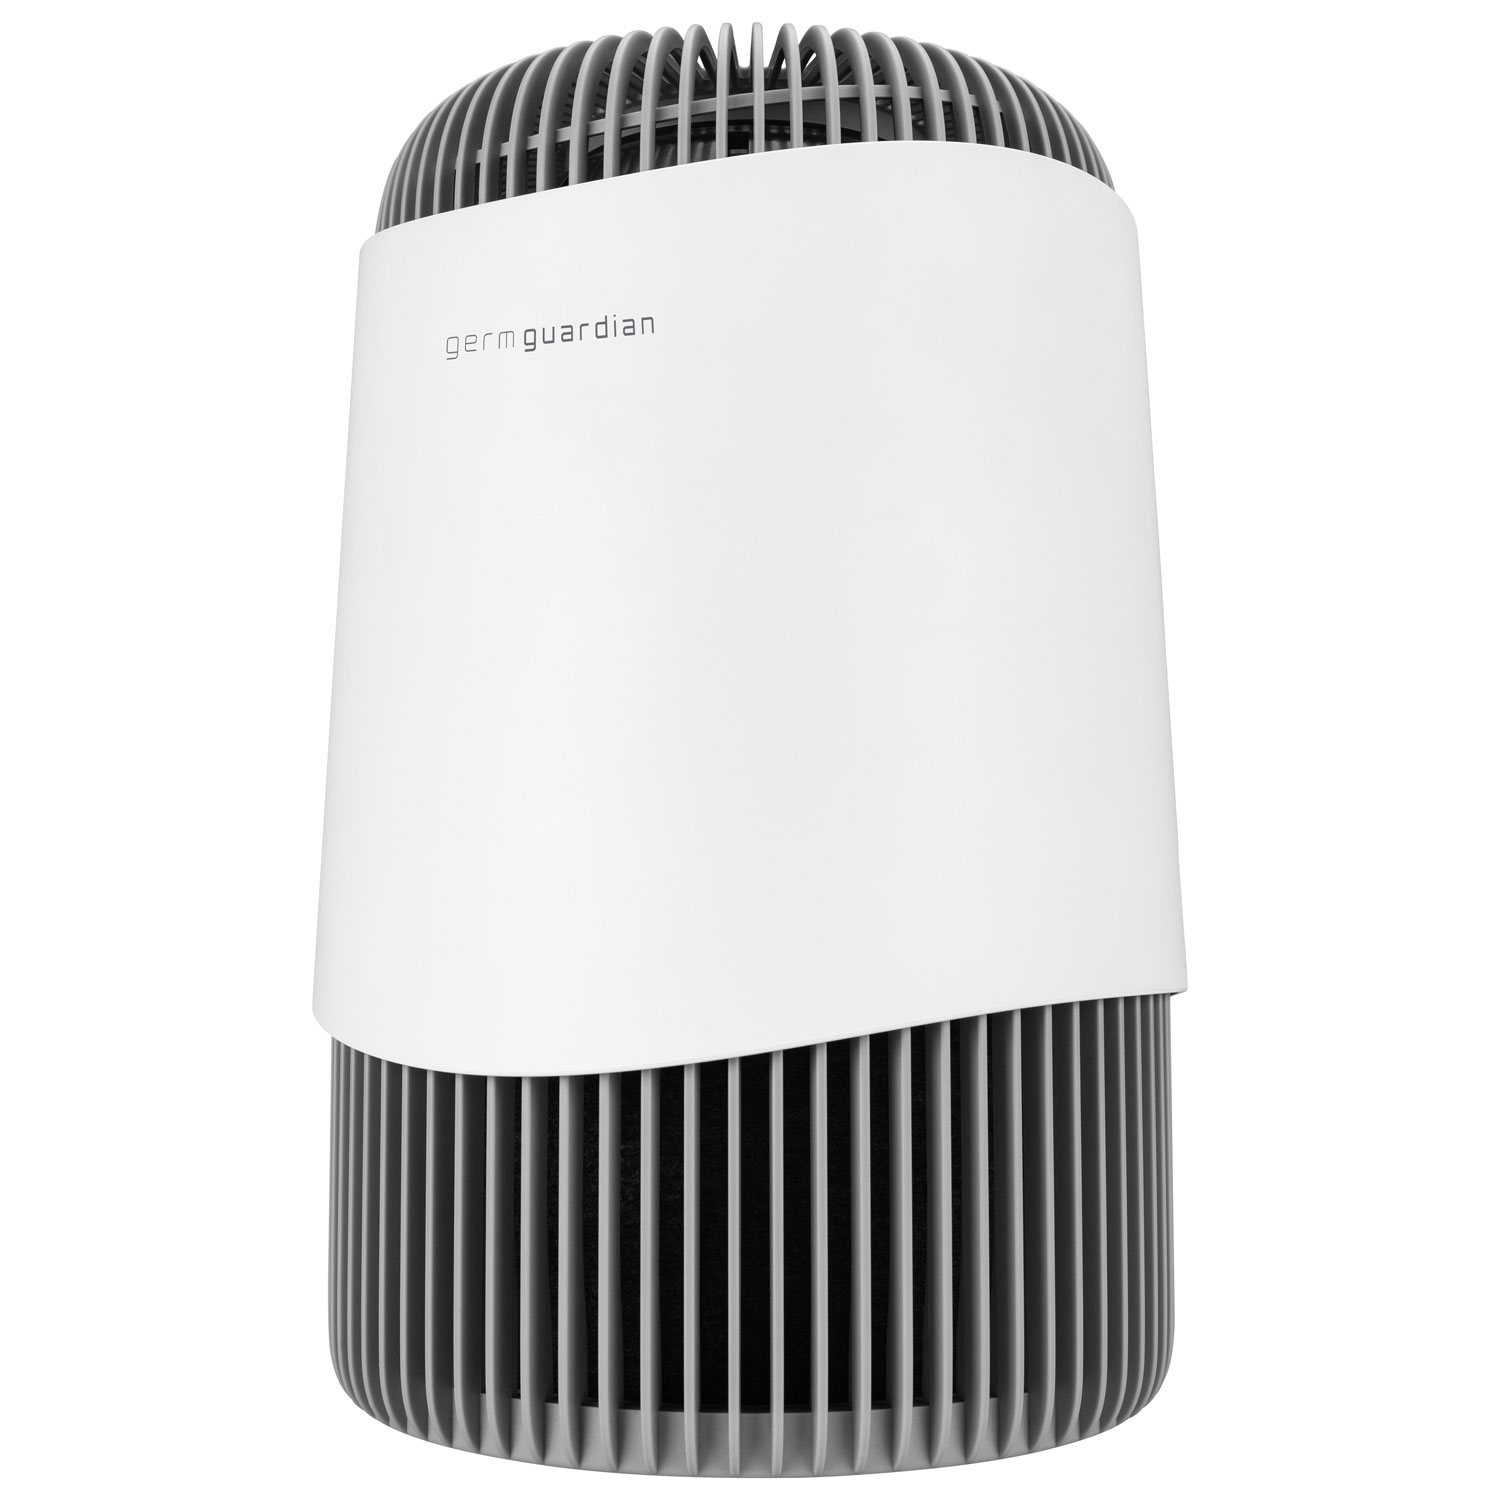 GermGuardian AC151 Compact Air Purifier with HEPA filter and UV-C - White/Grey